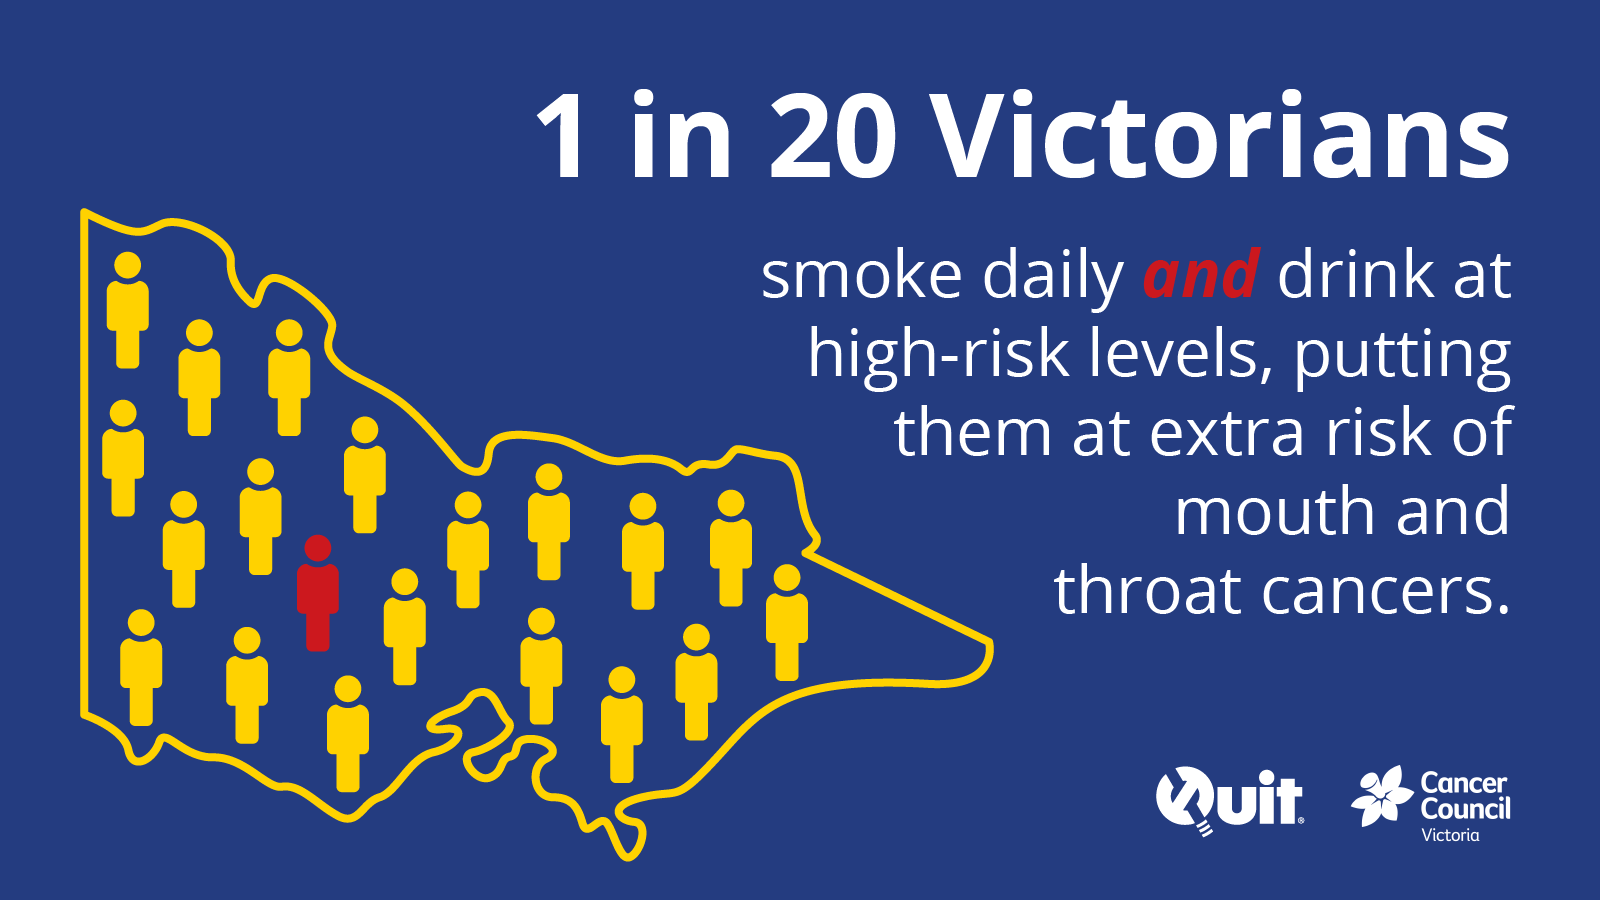 1 in 20 Victorians smoke daily and drink at high-risk levels, putting them at extra risk of mouth and throat cancers